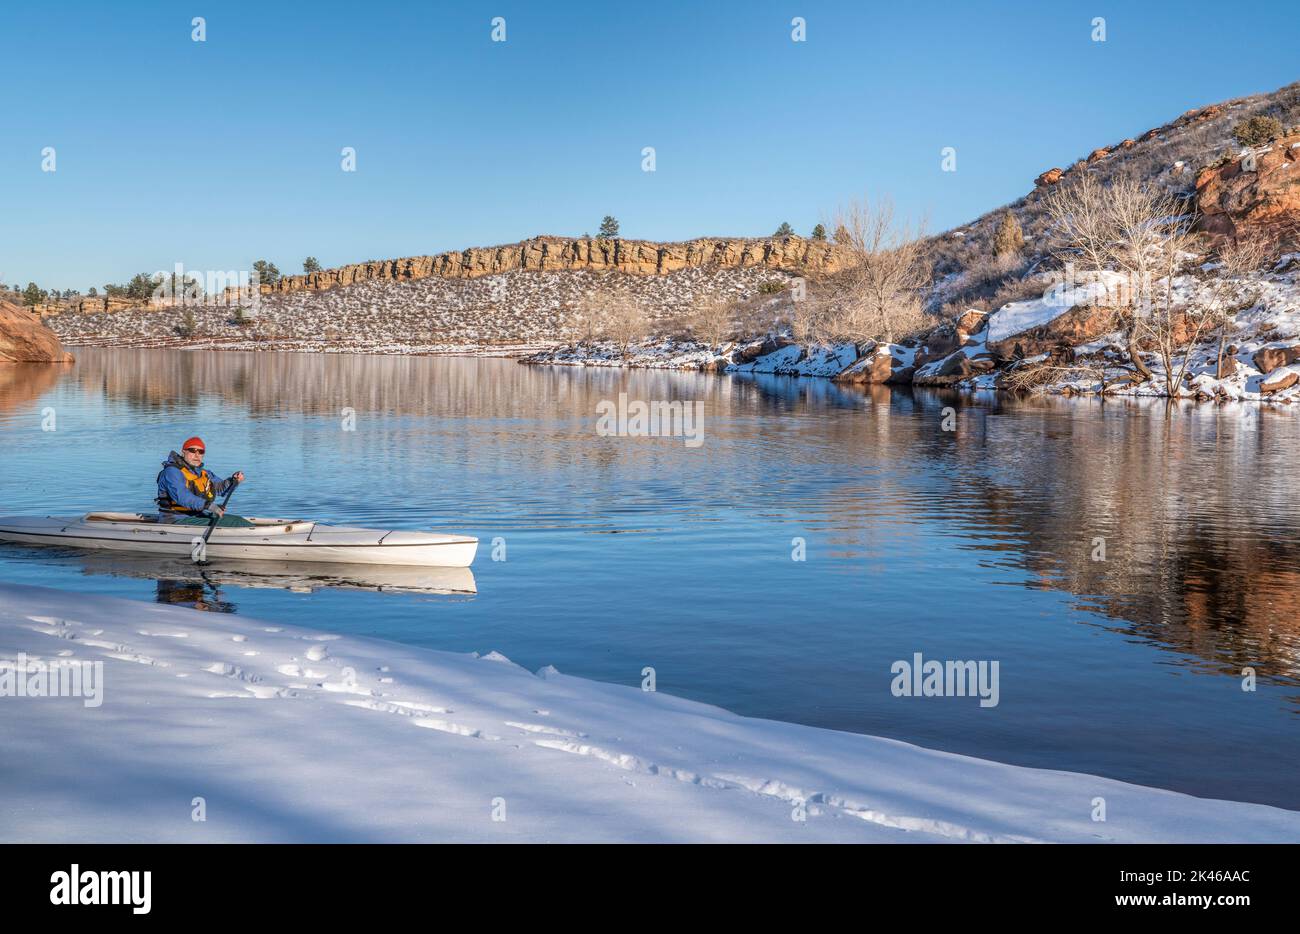 senior male wearing life jacket is paddling expedition canoe in winter scenery of Horsetooth Reservoir in northern Colorado Stock Photo